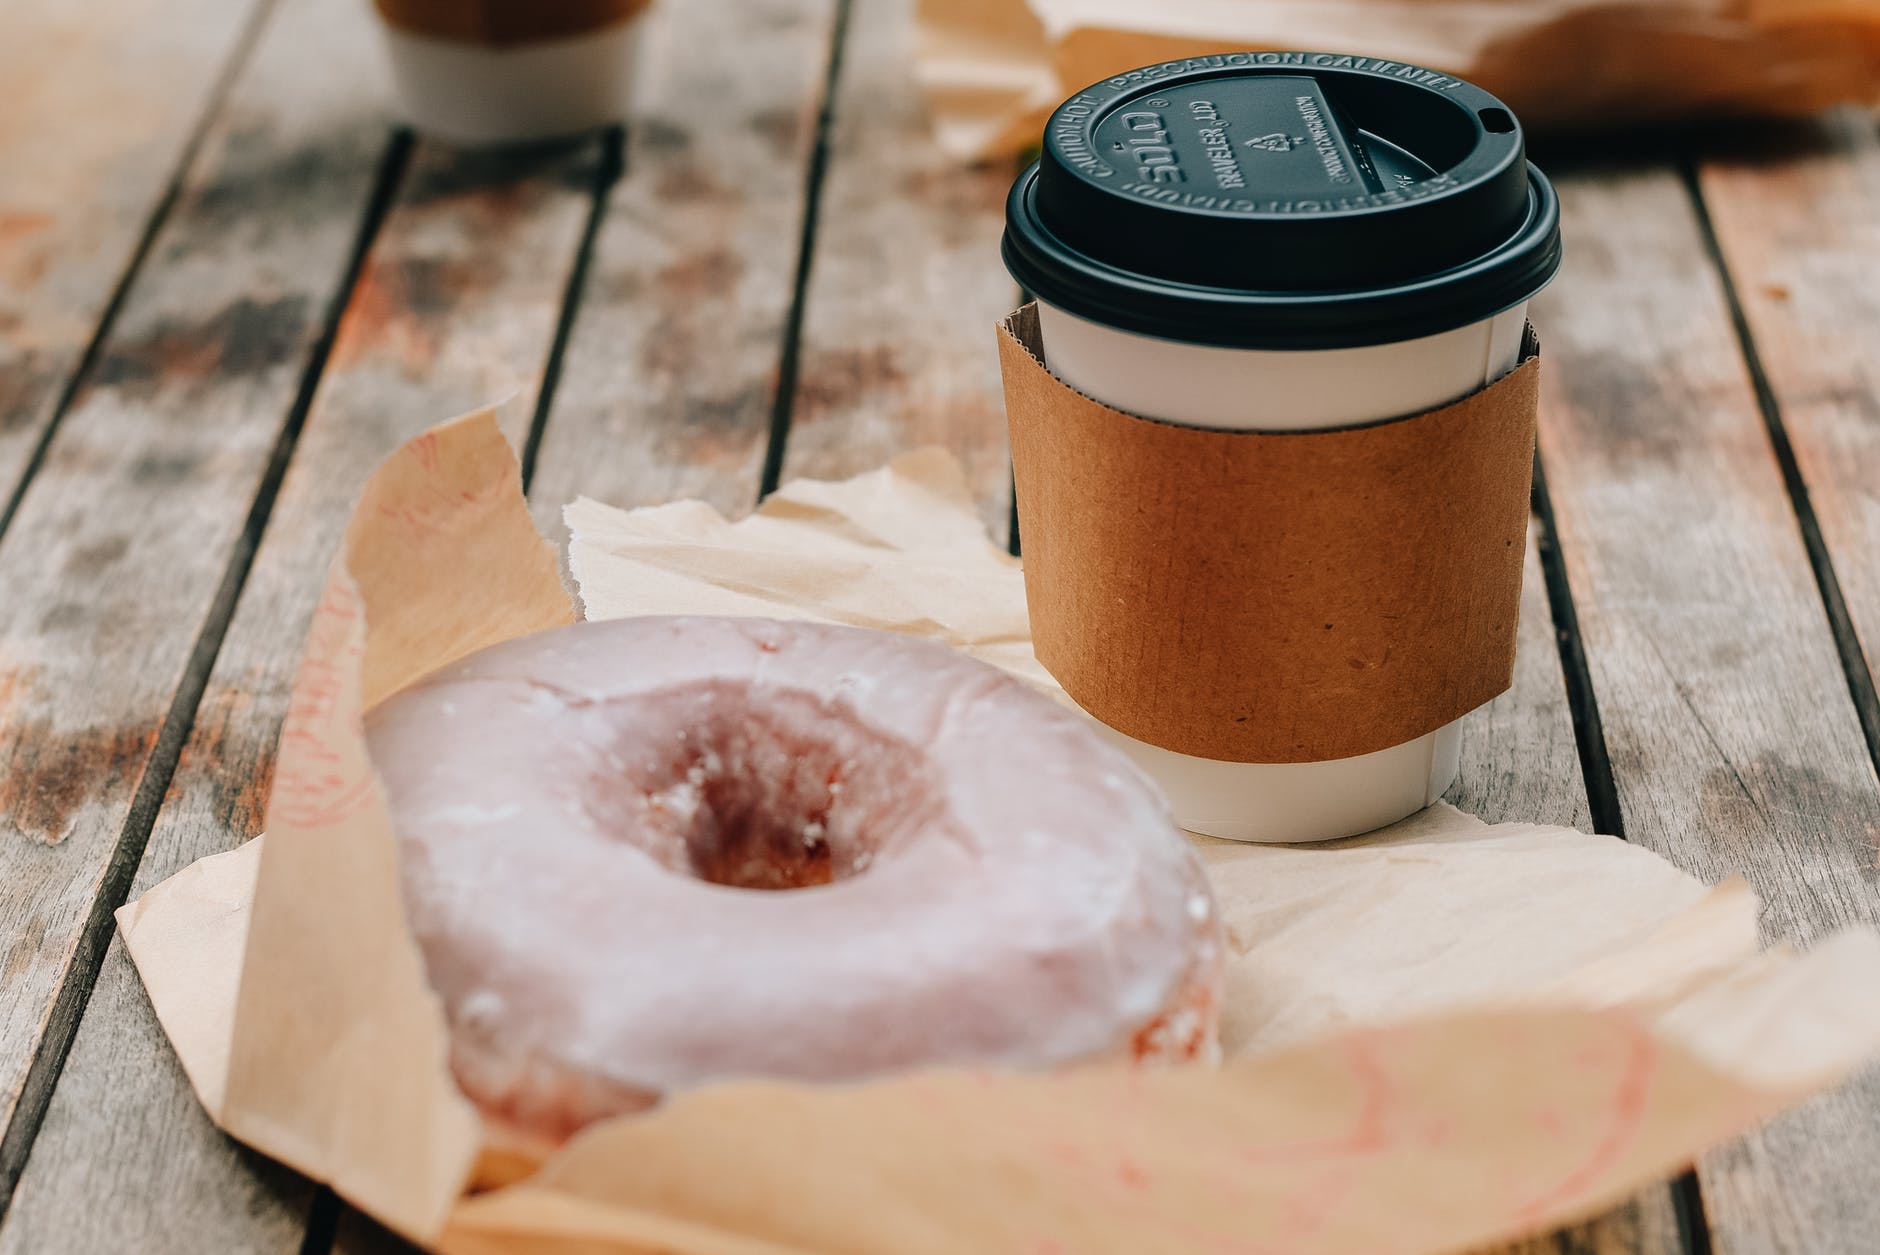 delicious donut and takeaway coffee placed on wooden surface